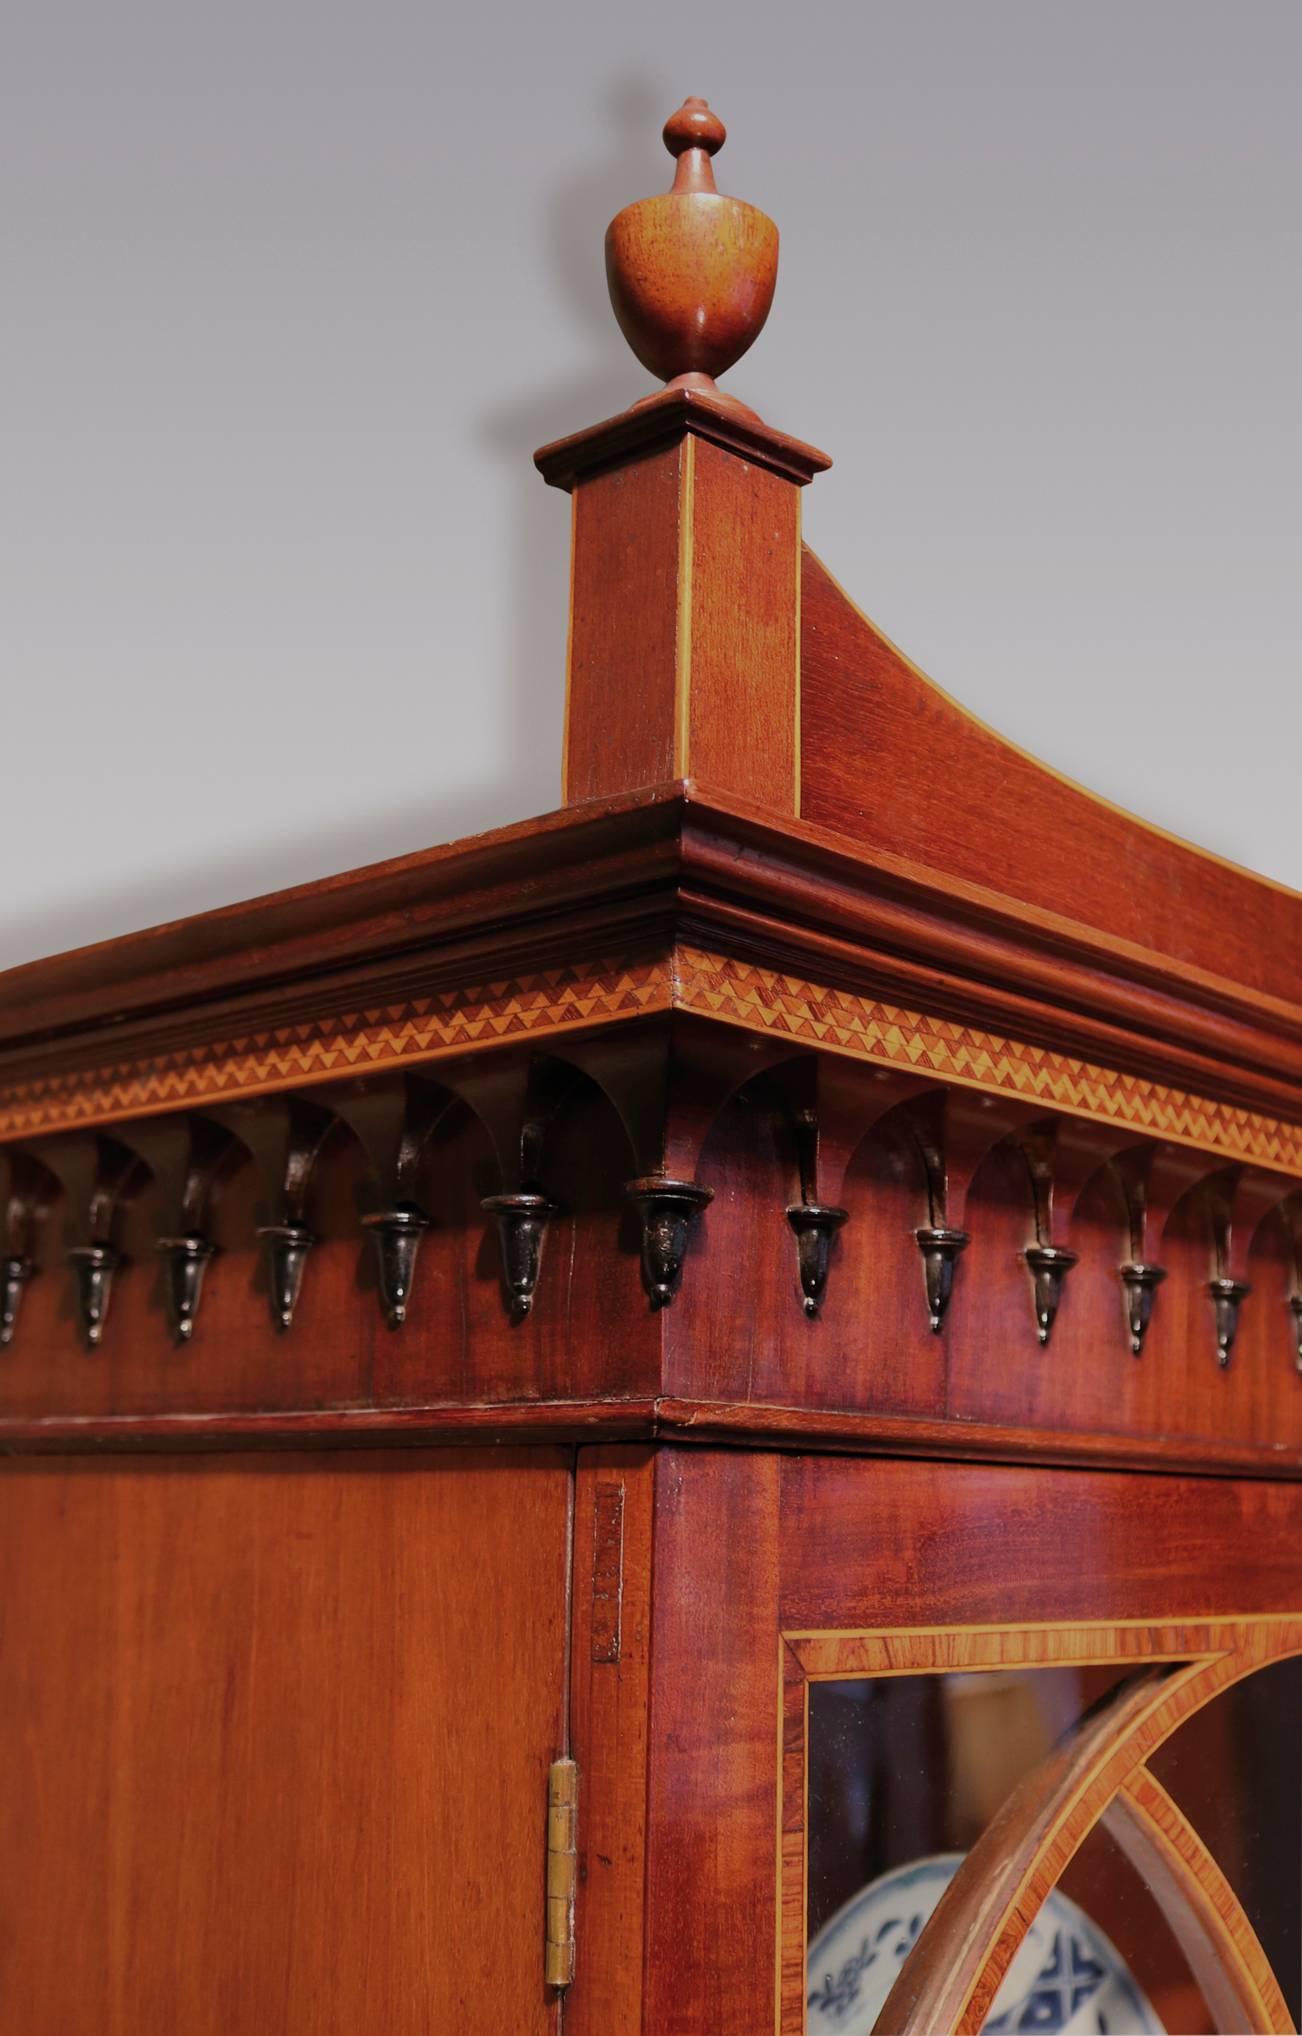 A fine late 18th century Sheraton period well figured mahogany Secretaire bookcase, having moulded cornice with chequered inlay, surmounted by urns and central inlaid satinwood panel, above tulipwood crossbanded shaped astragal glazed doors. The